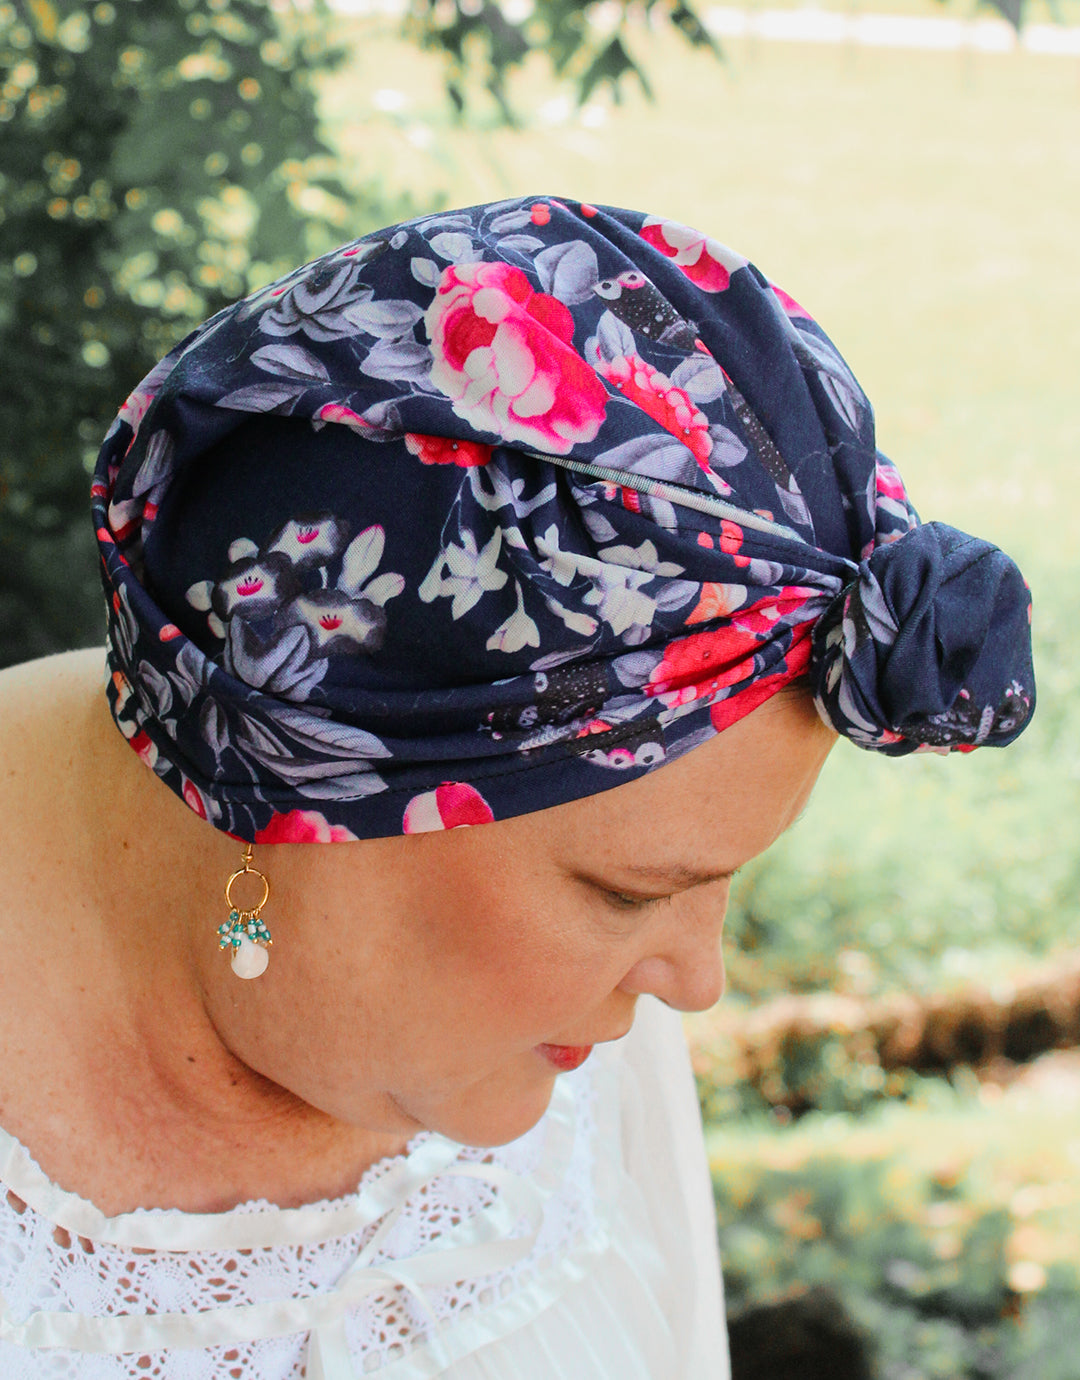 BANDED Women’s Full Coverage Headwraps + Hair Accessories - Multi-style Headwrap